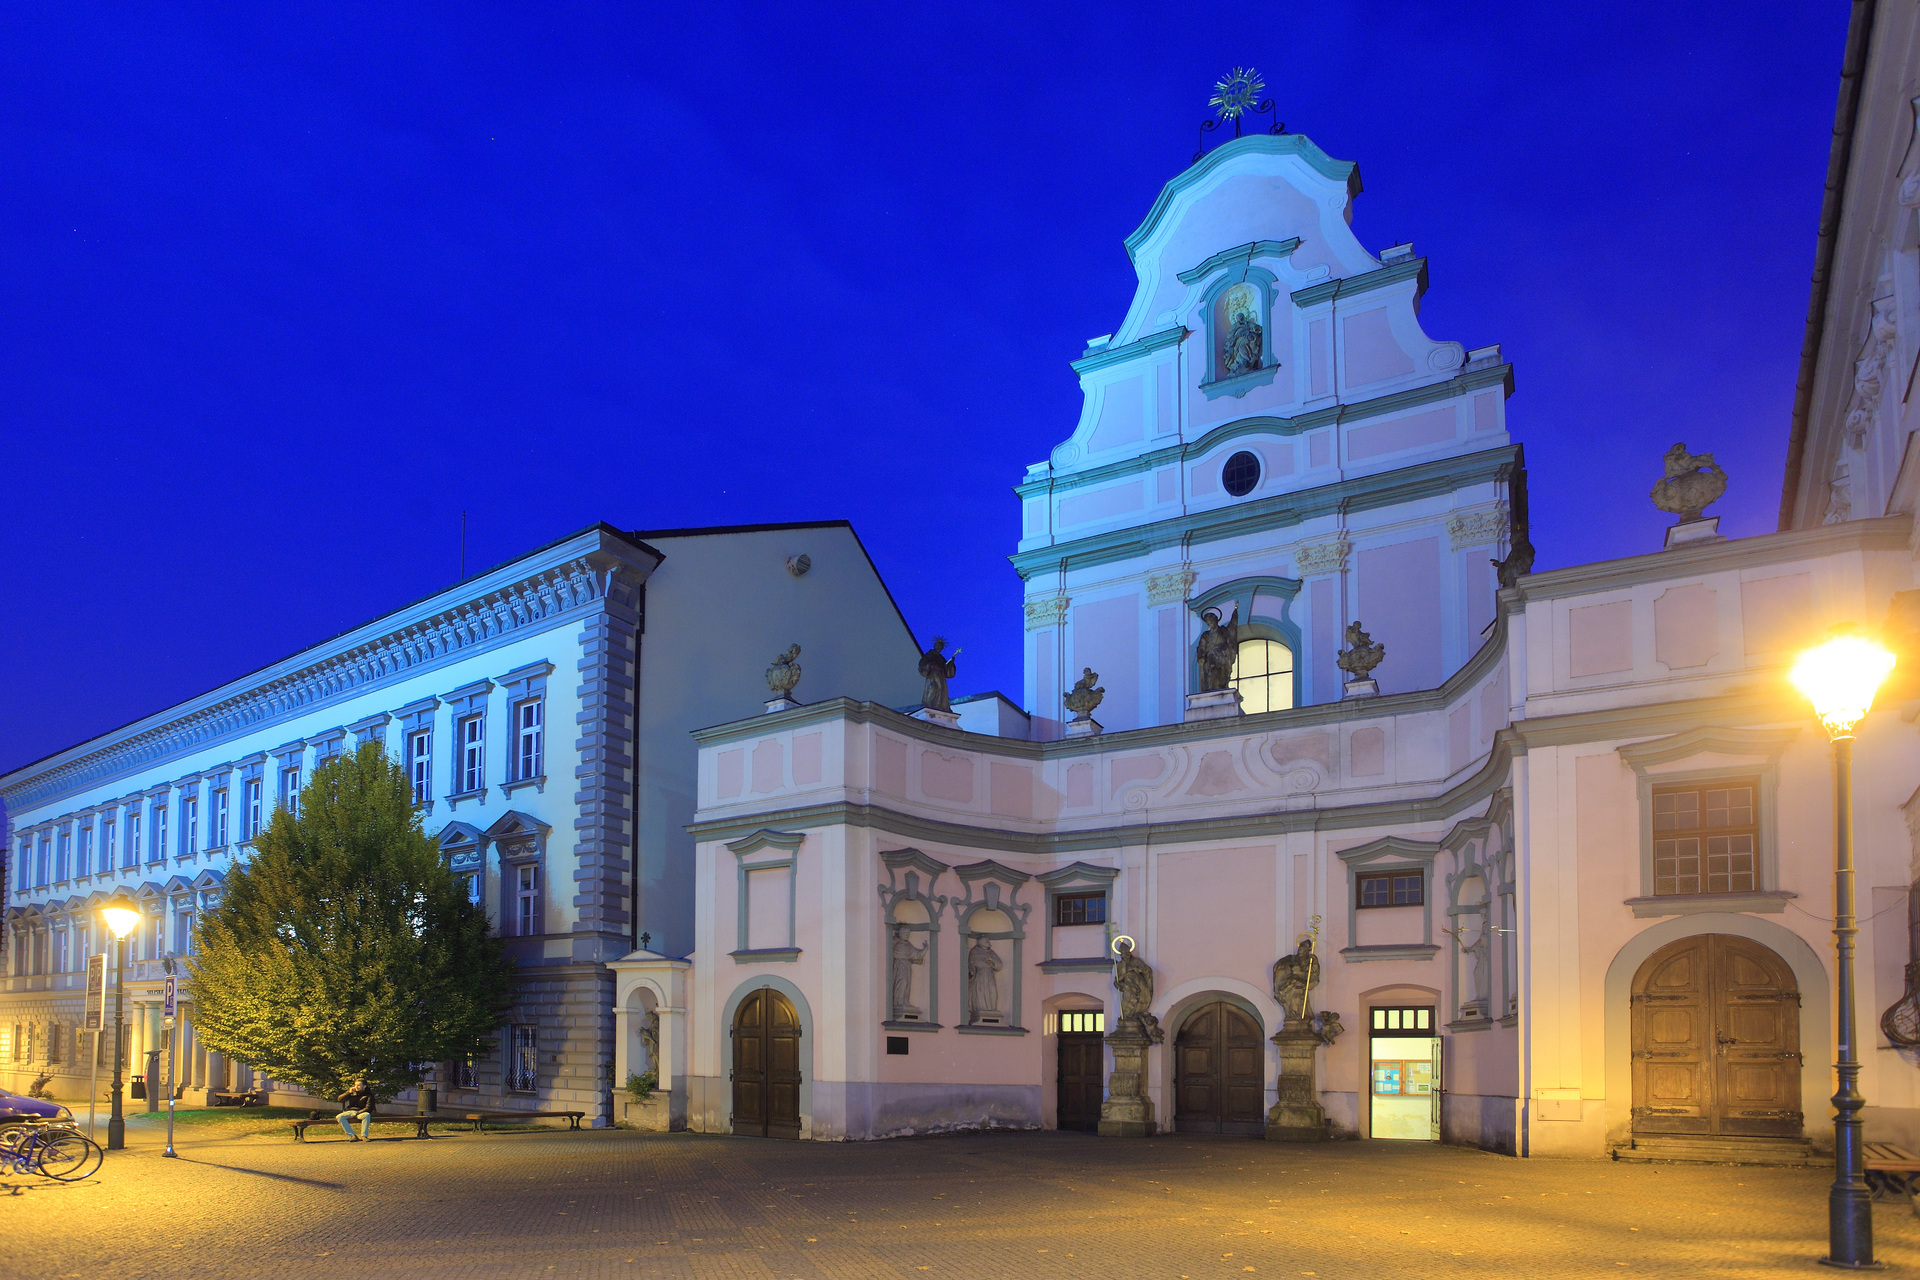 The Church of the Holy Spirit in Opava